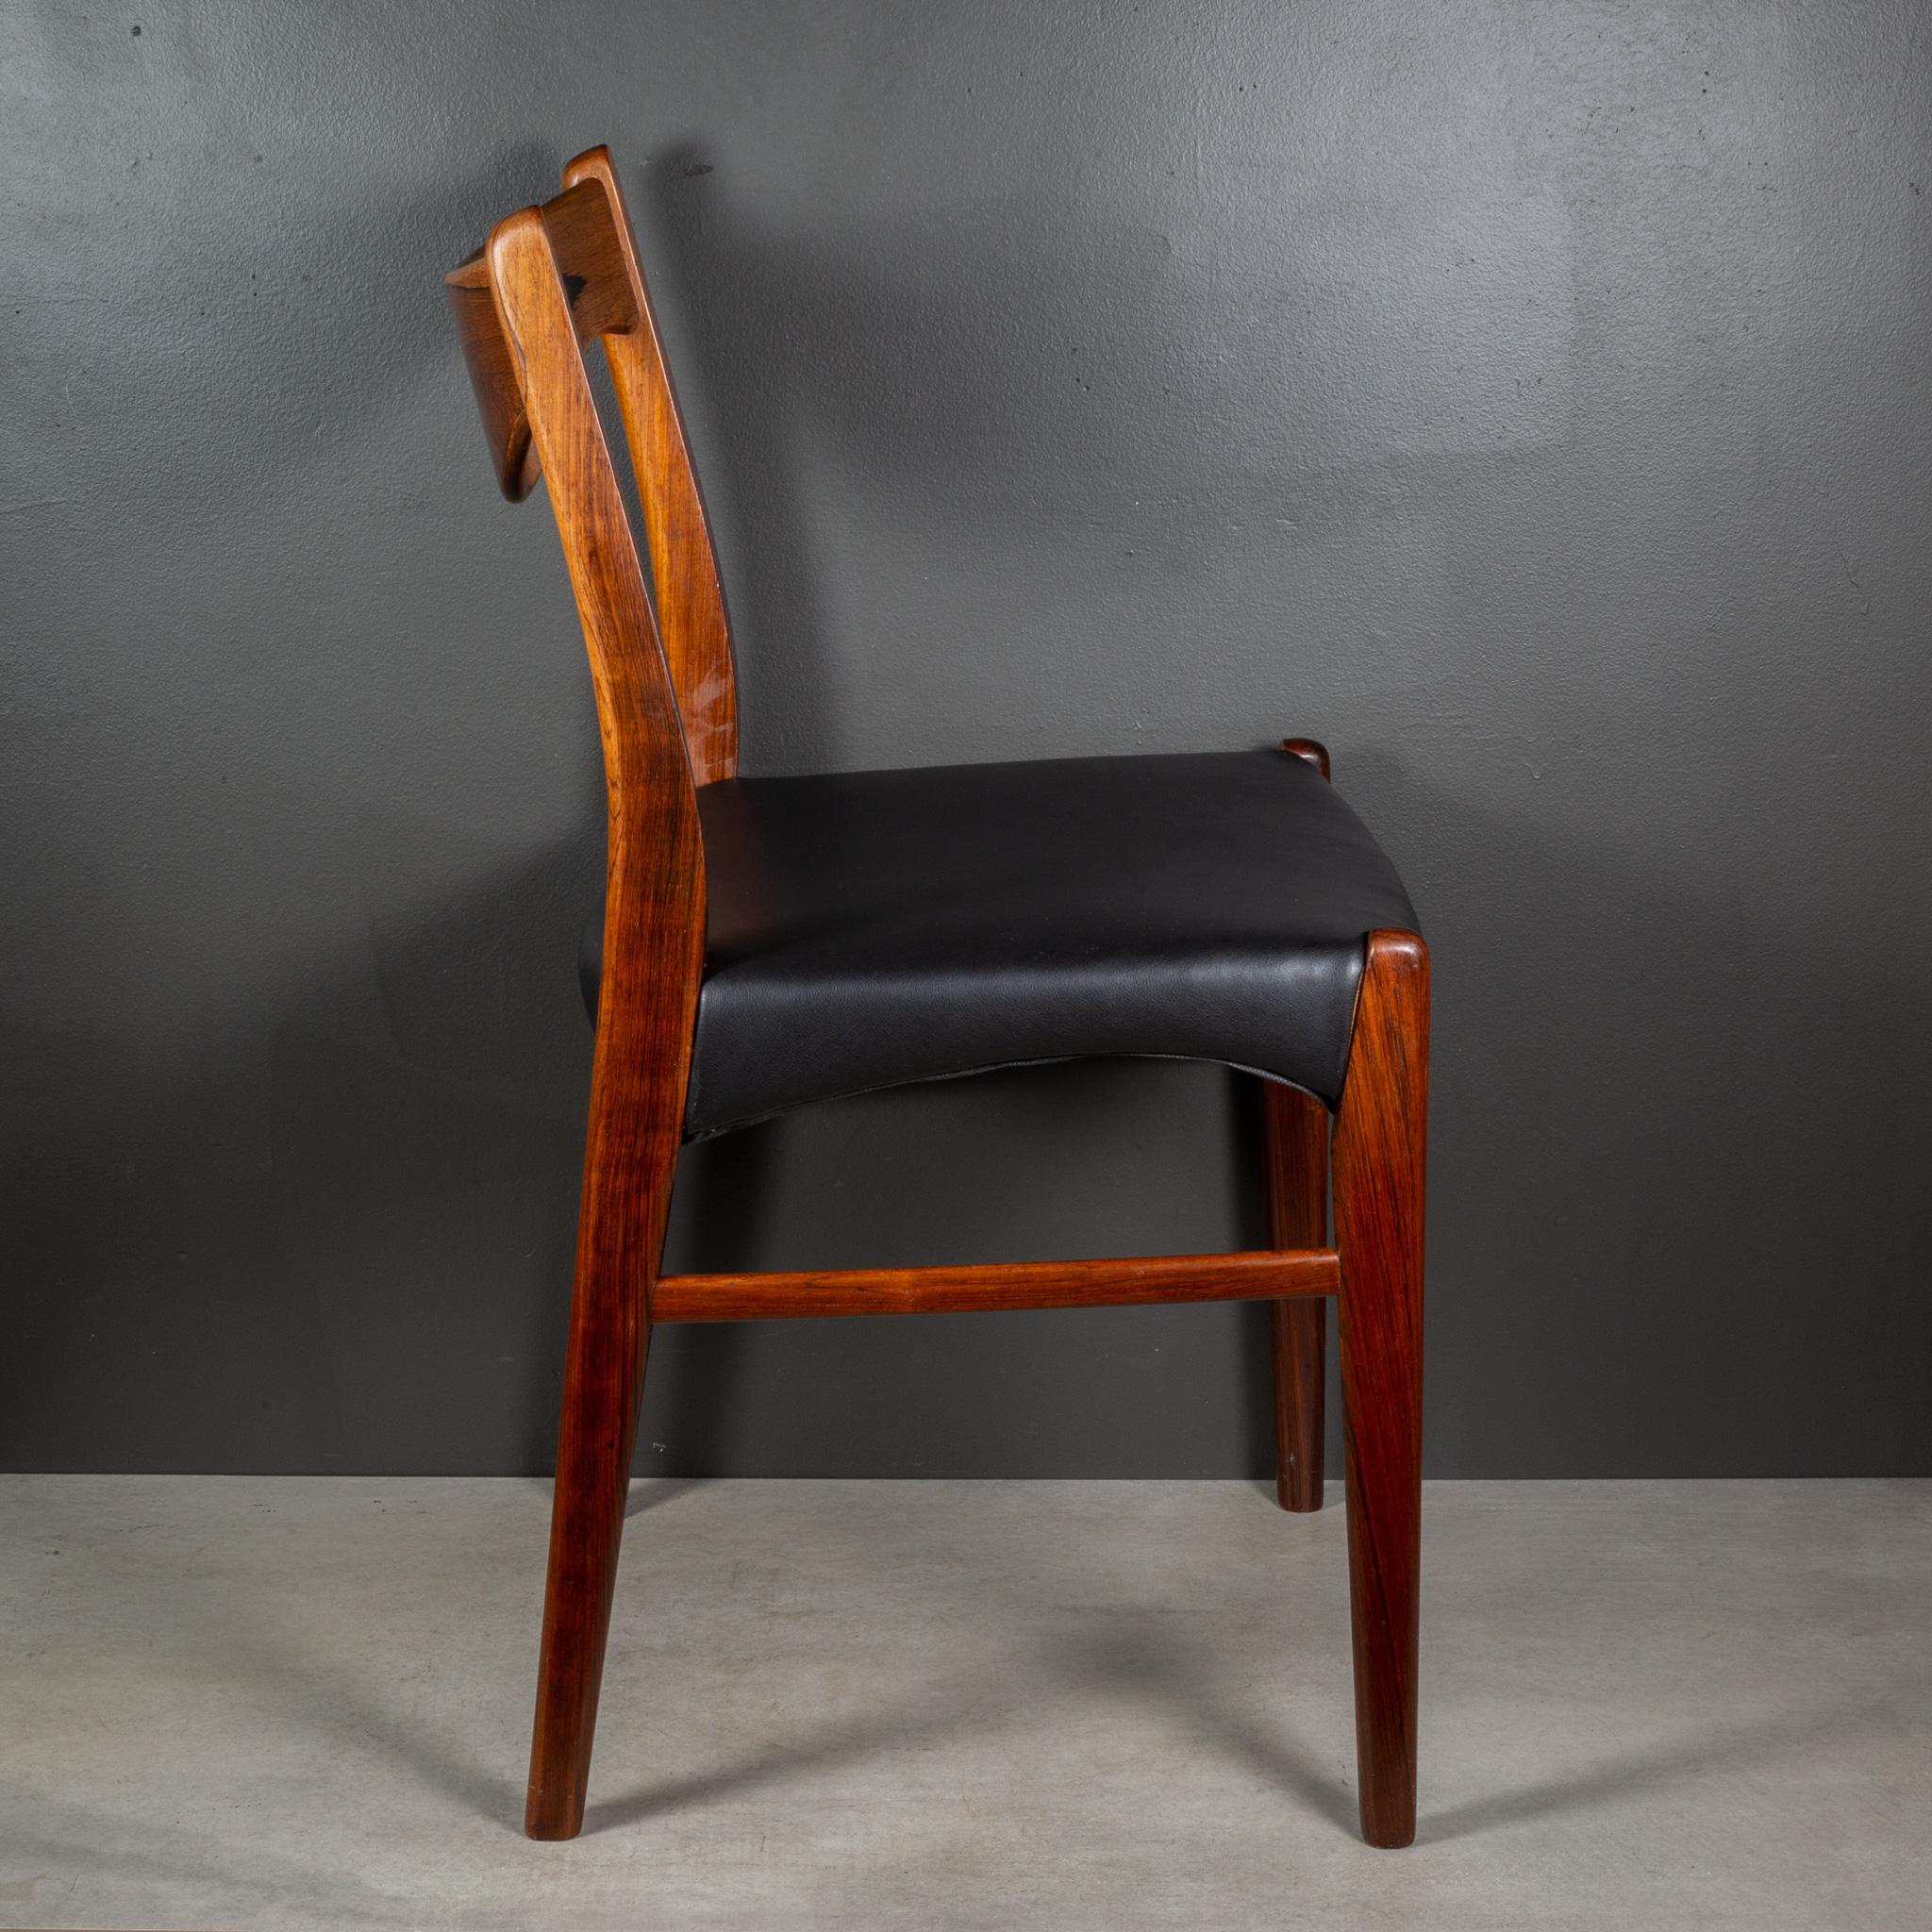 Arne Wahl Iversen Model GS61 Rosewood and Leather Dining Chairs c.1950 For Sale 4